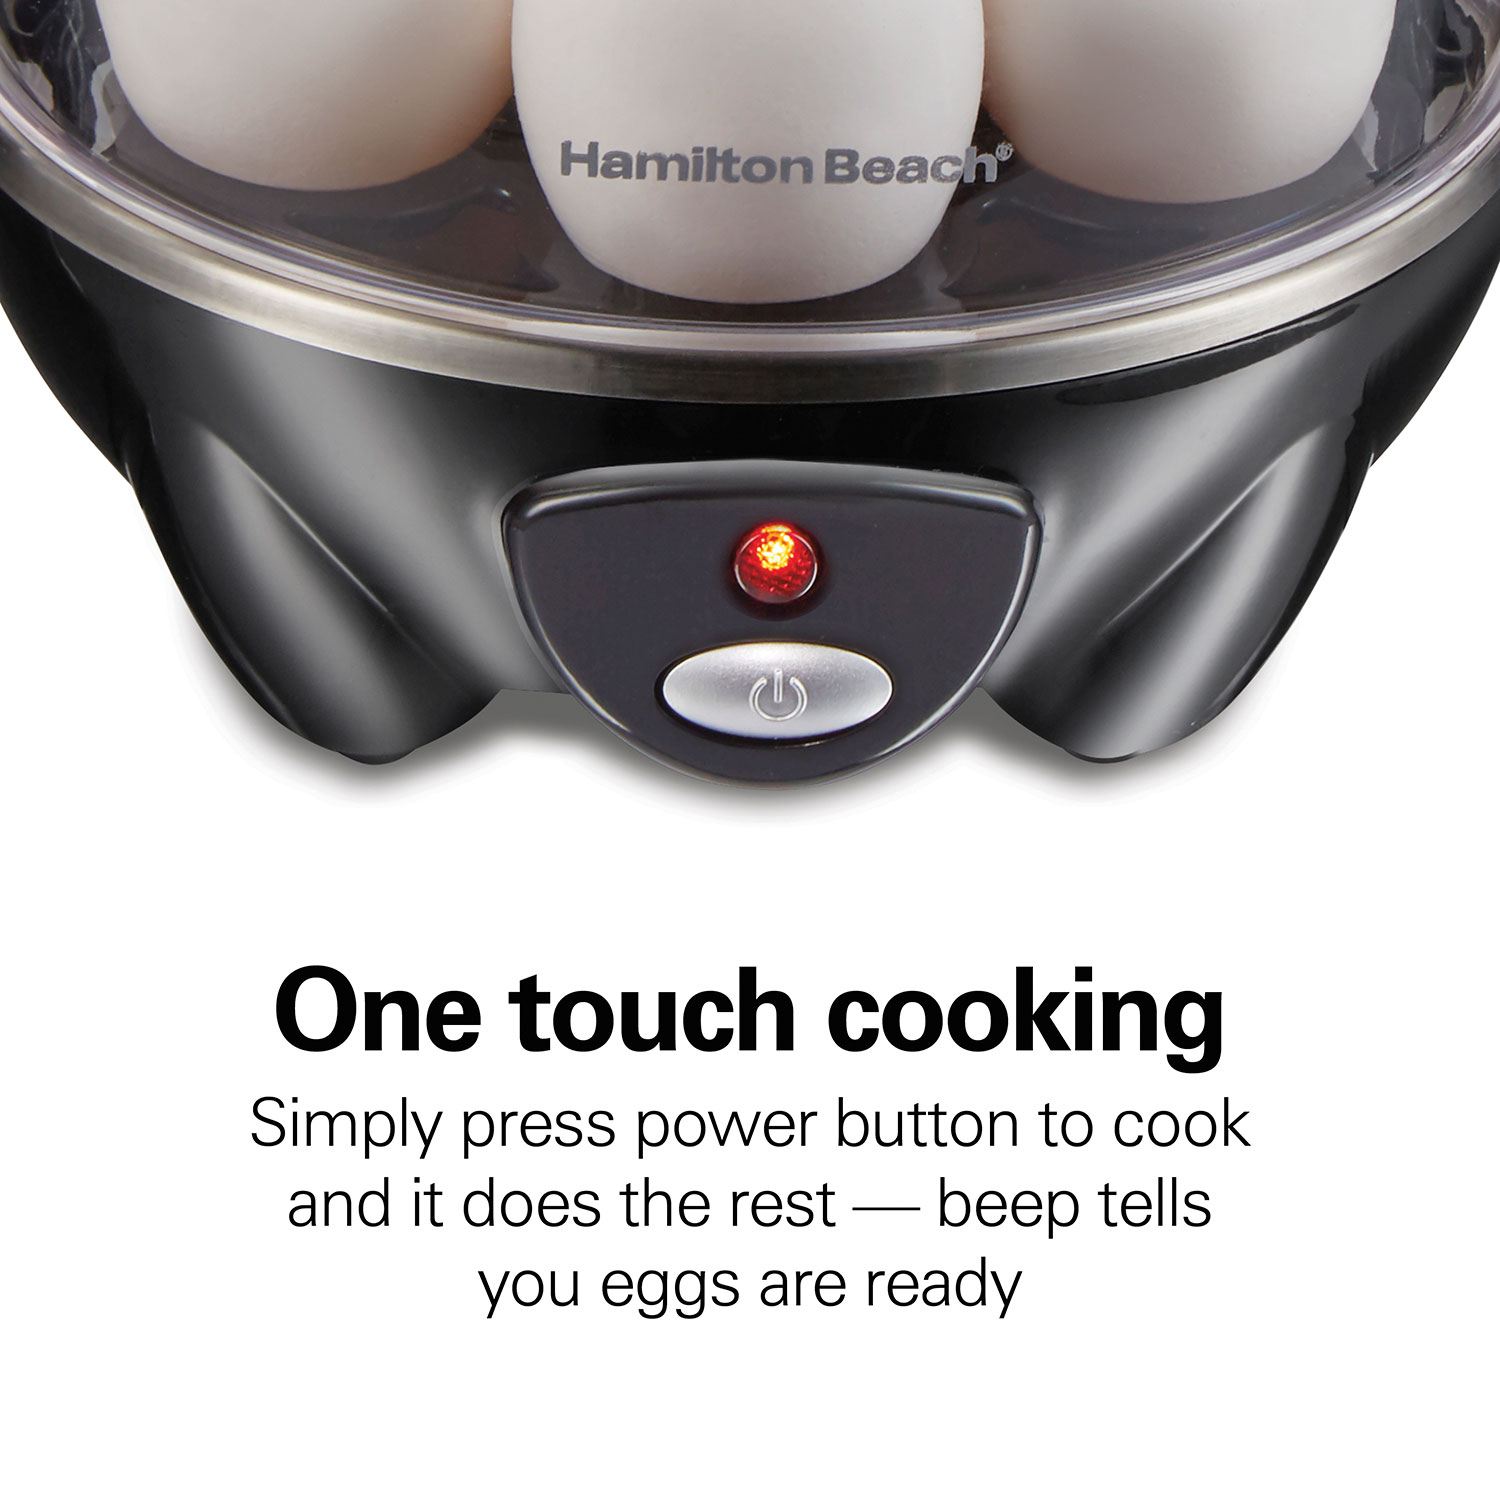  Hamilton Beach 3-in-1 Electric Egg Cooker for Hard